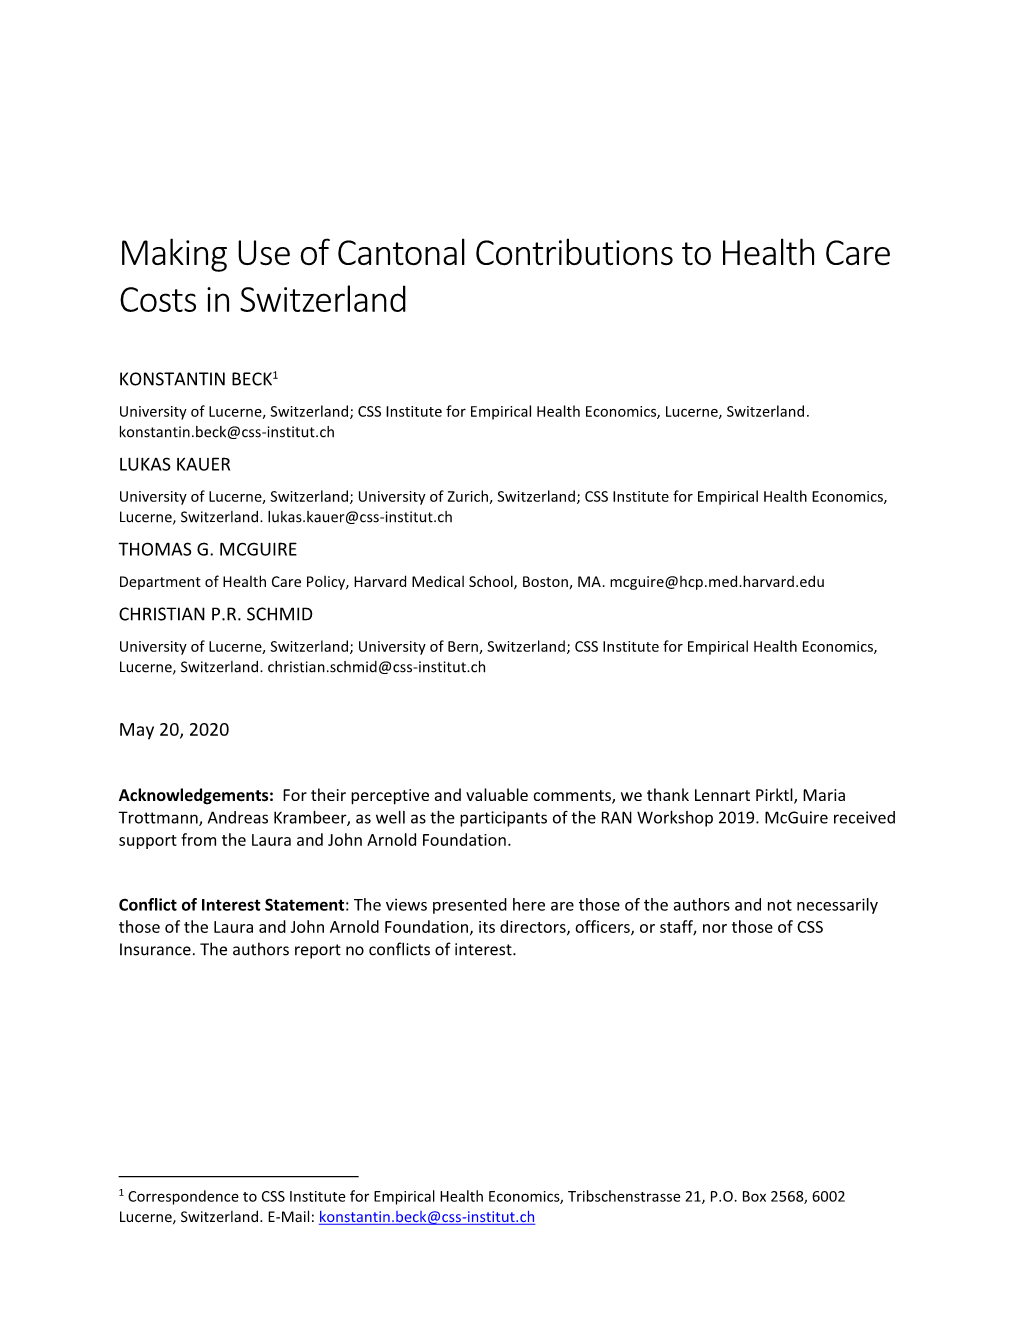 Making Use of Cantonal Contributions to Health Care Costs in Switzerland